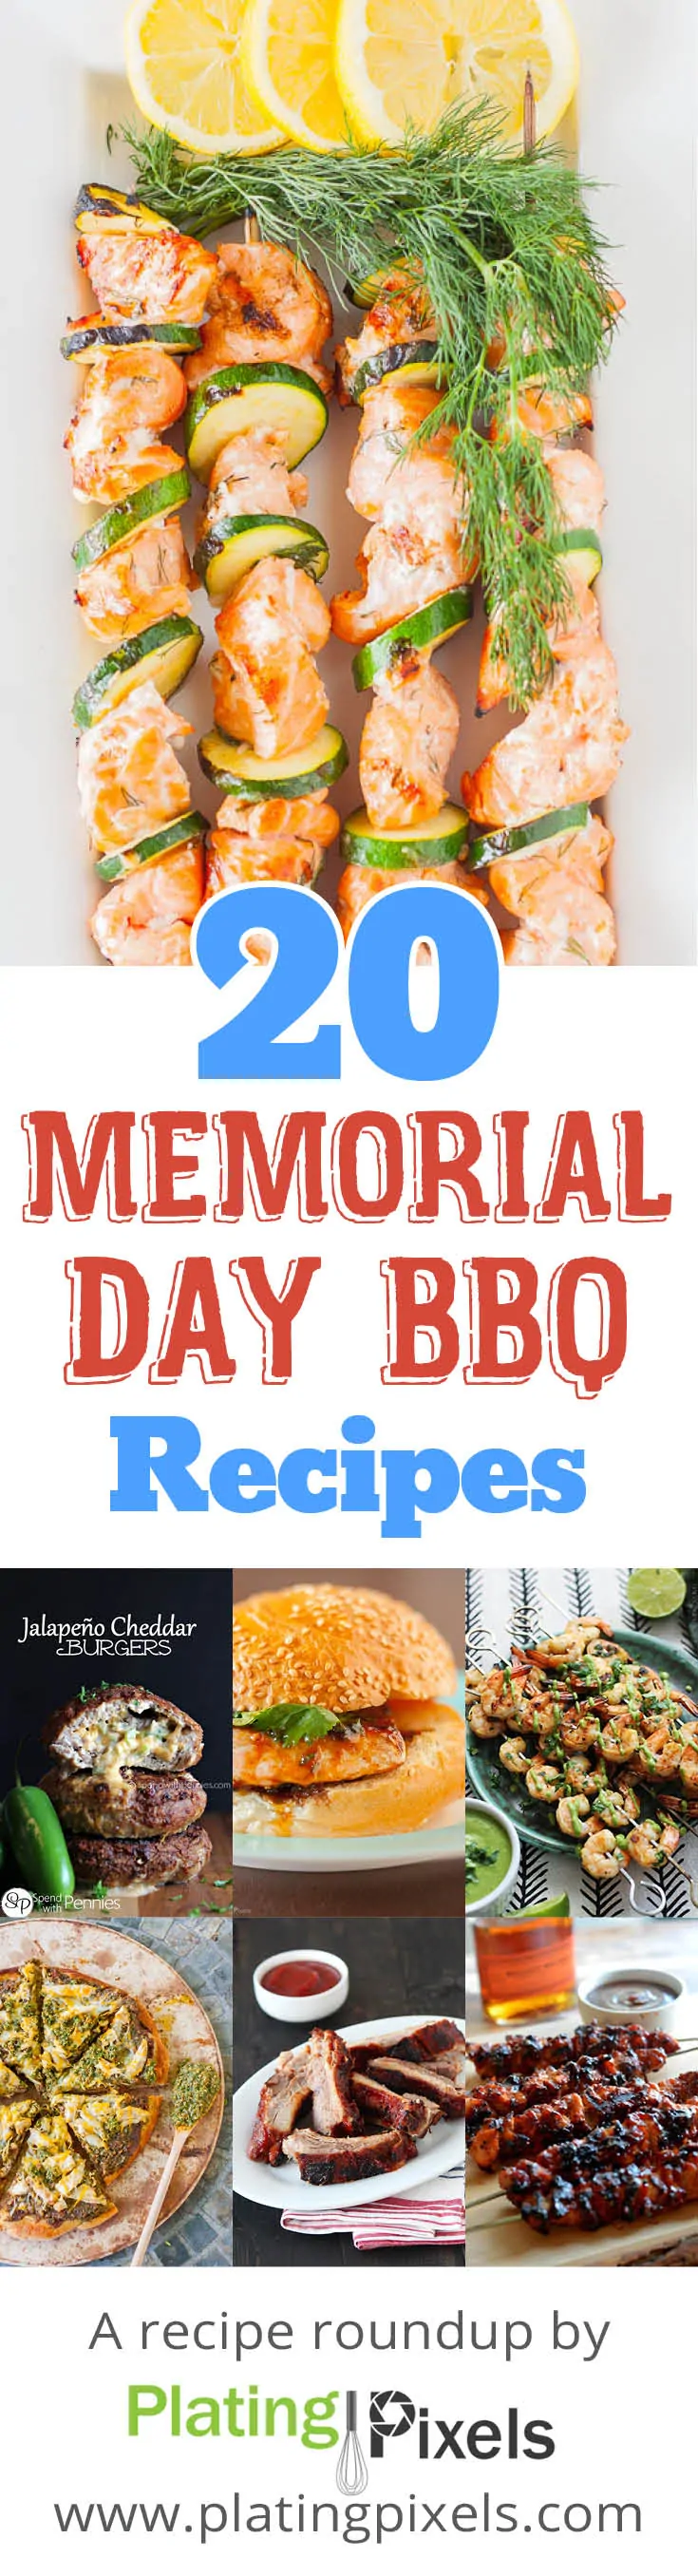 20 Ideas for Your Memorial Day Barbecue Recipes